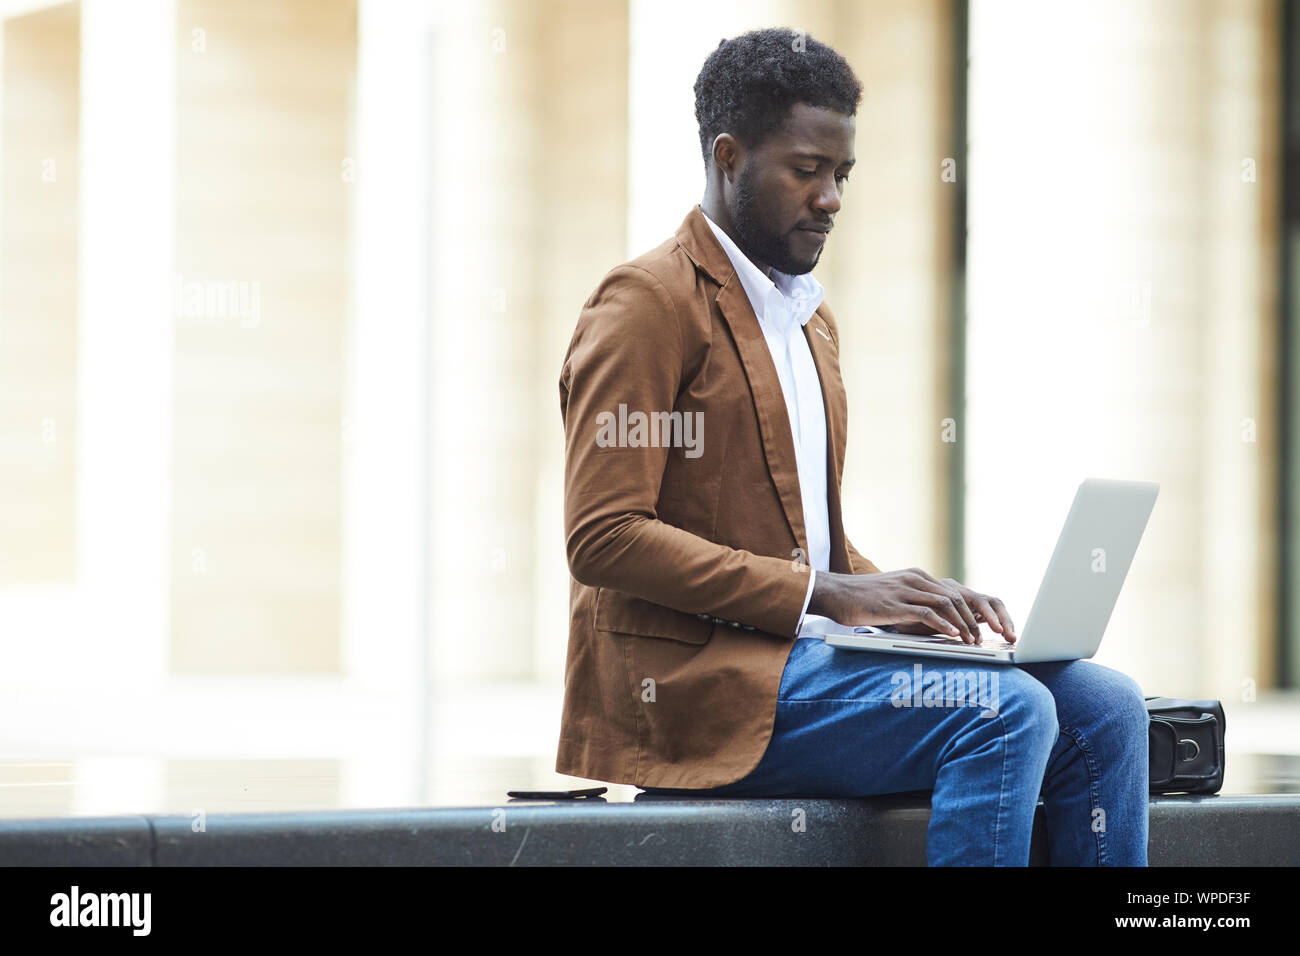 Side view portrait of young African-American man using laptop outdoors while working on business project in urban setting, copy space Stock Photo